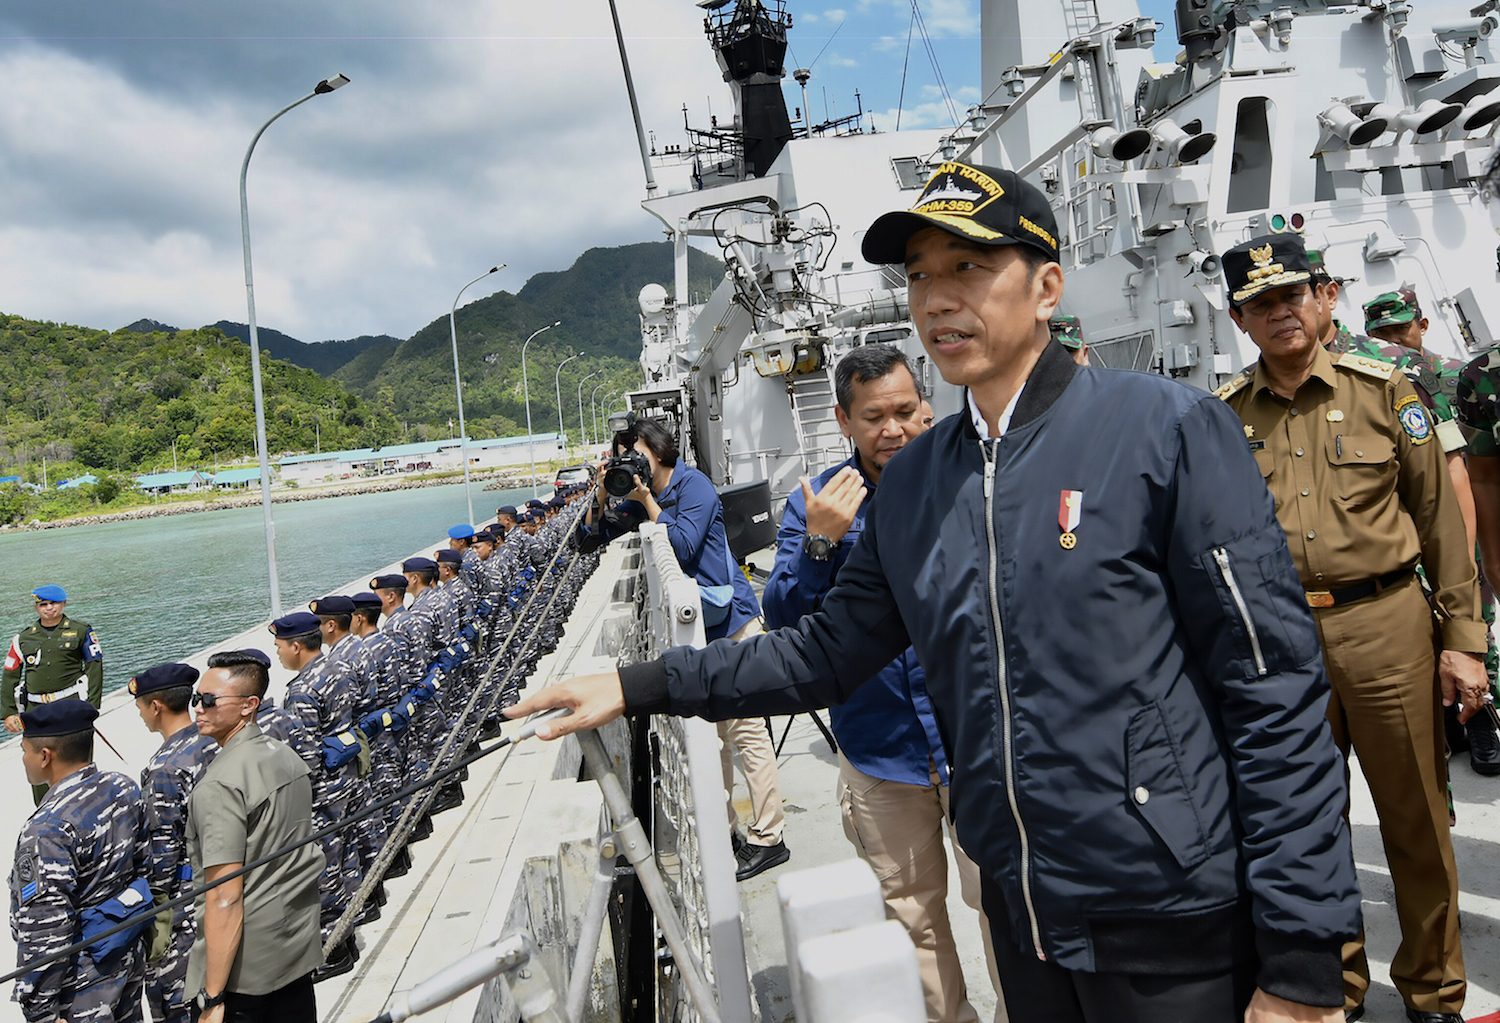 Indonesian President Joko Widodo visits a military base in the Natuna islands during a standoff with Chinese vessels in the maritime area on January 8, 2020